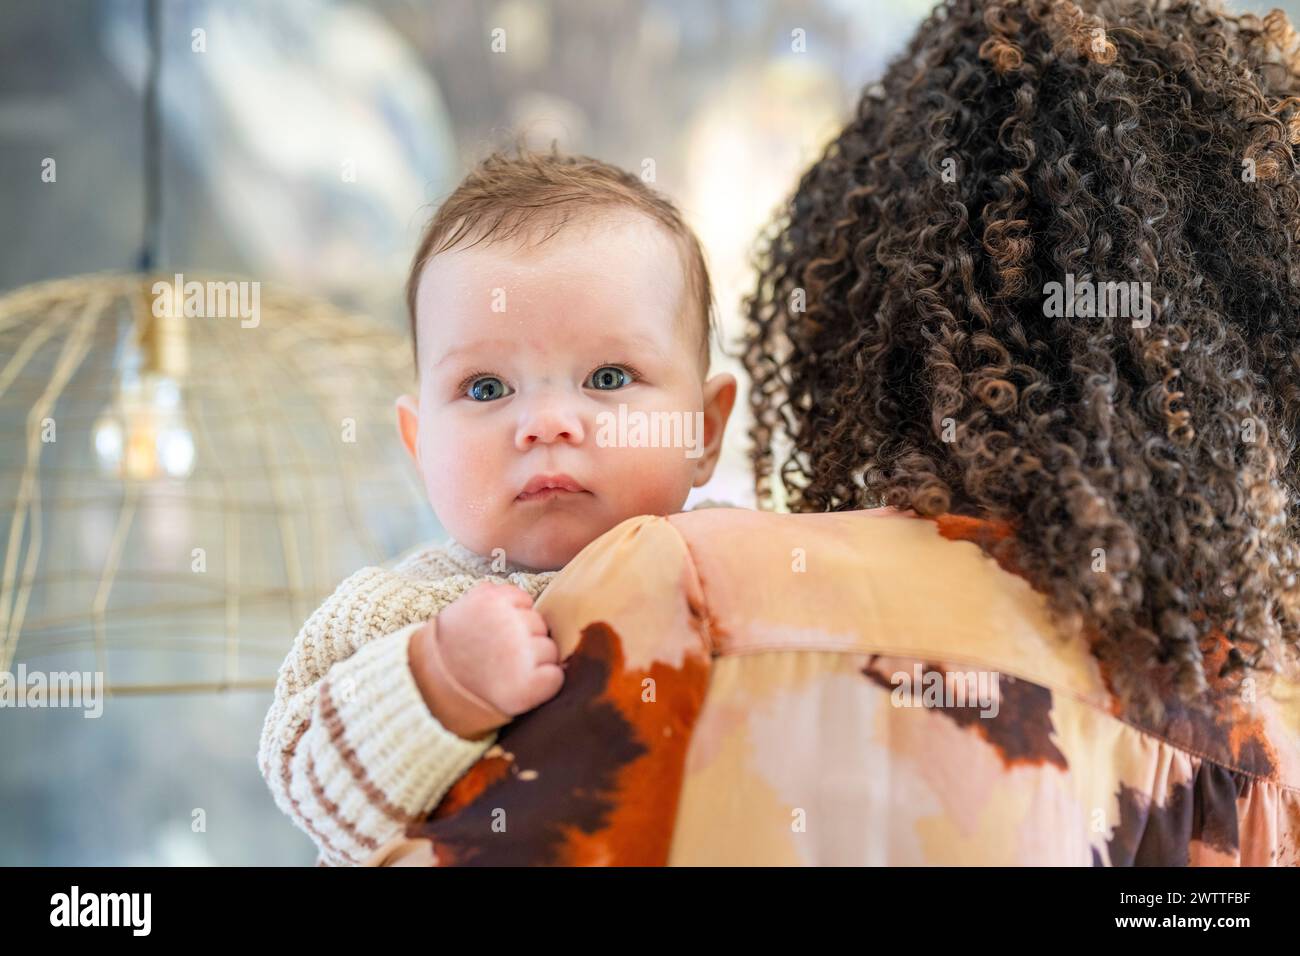 Curious baby peeking over mother's shoulder. Stock Photo